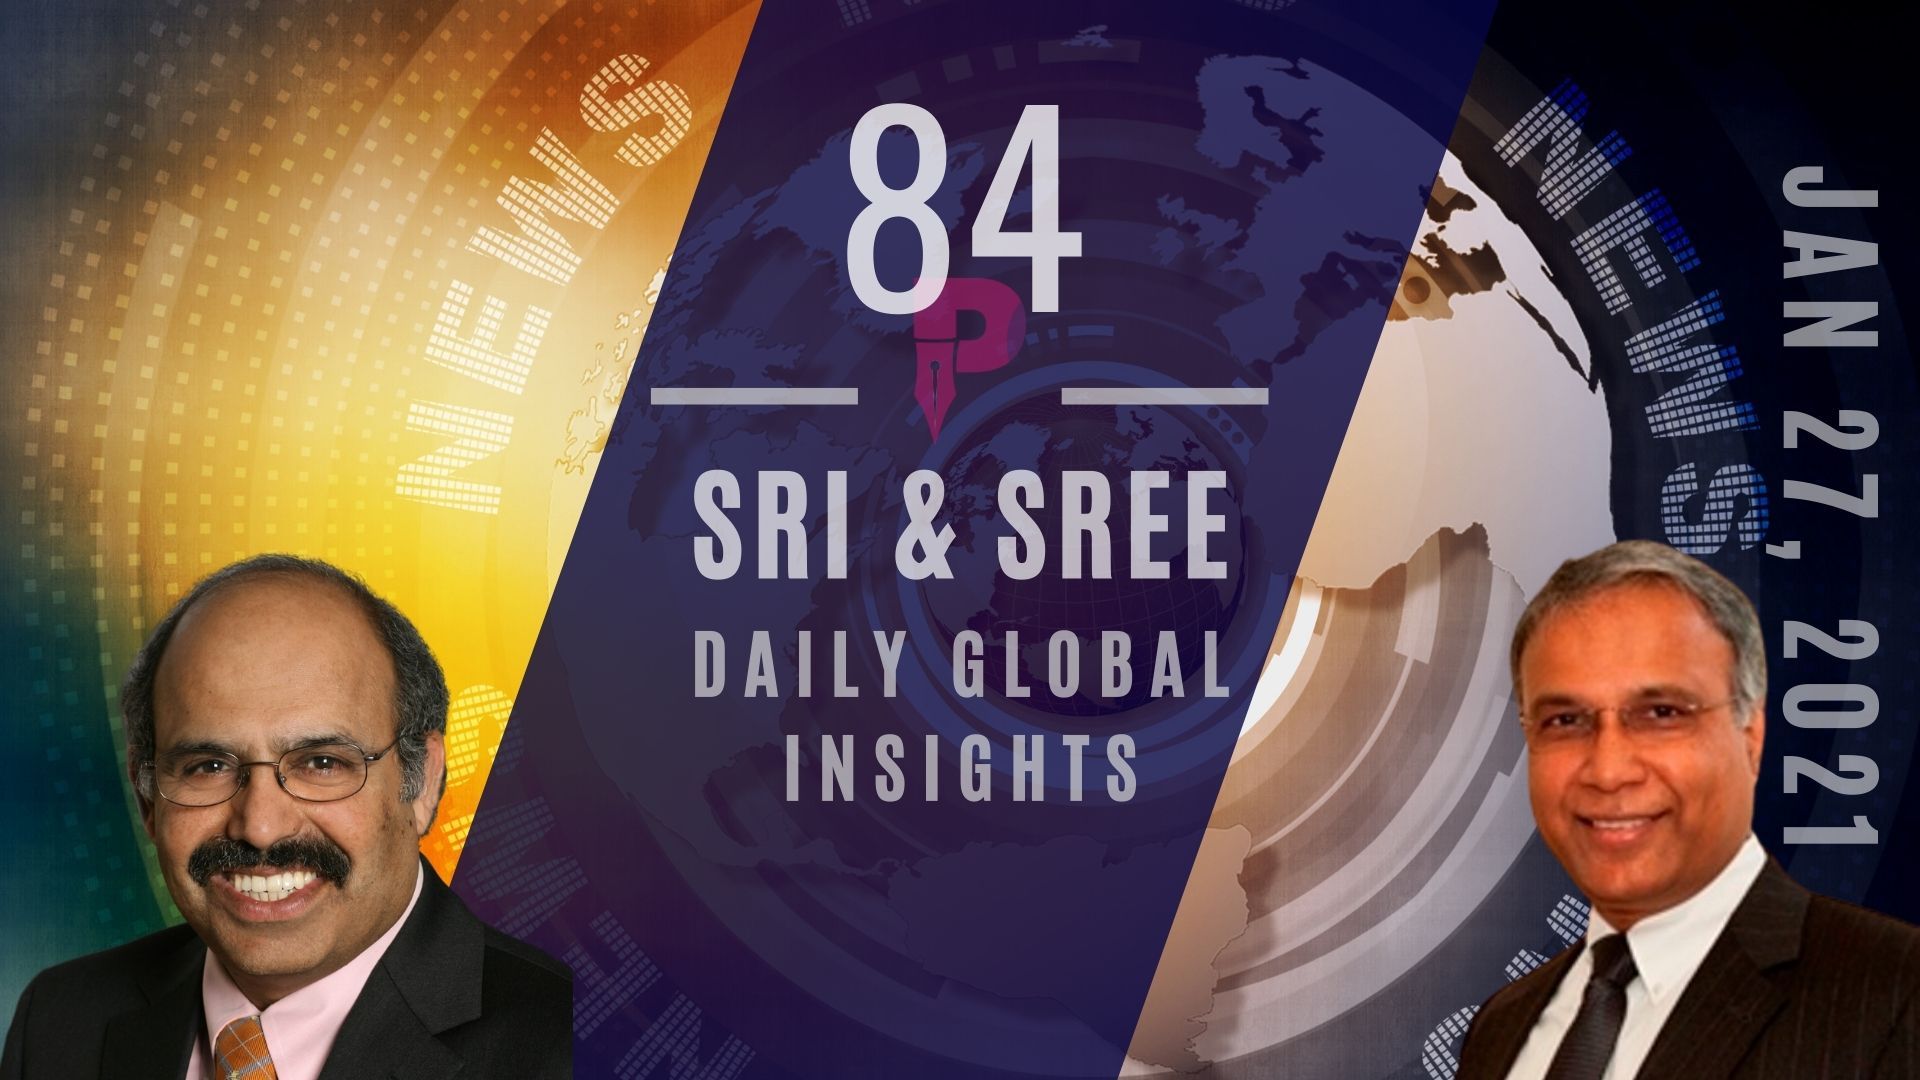 #DailyGlobalInsights #EP84 Impeachment non-starter? Biden admits as much. Moderna on new vaccine for SA variant & more